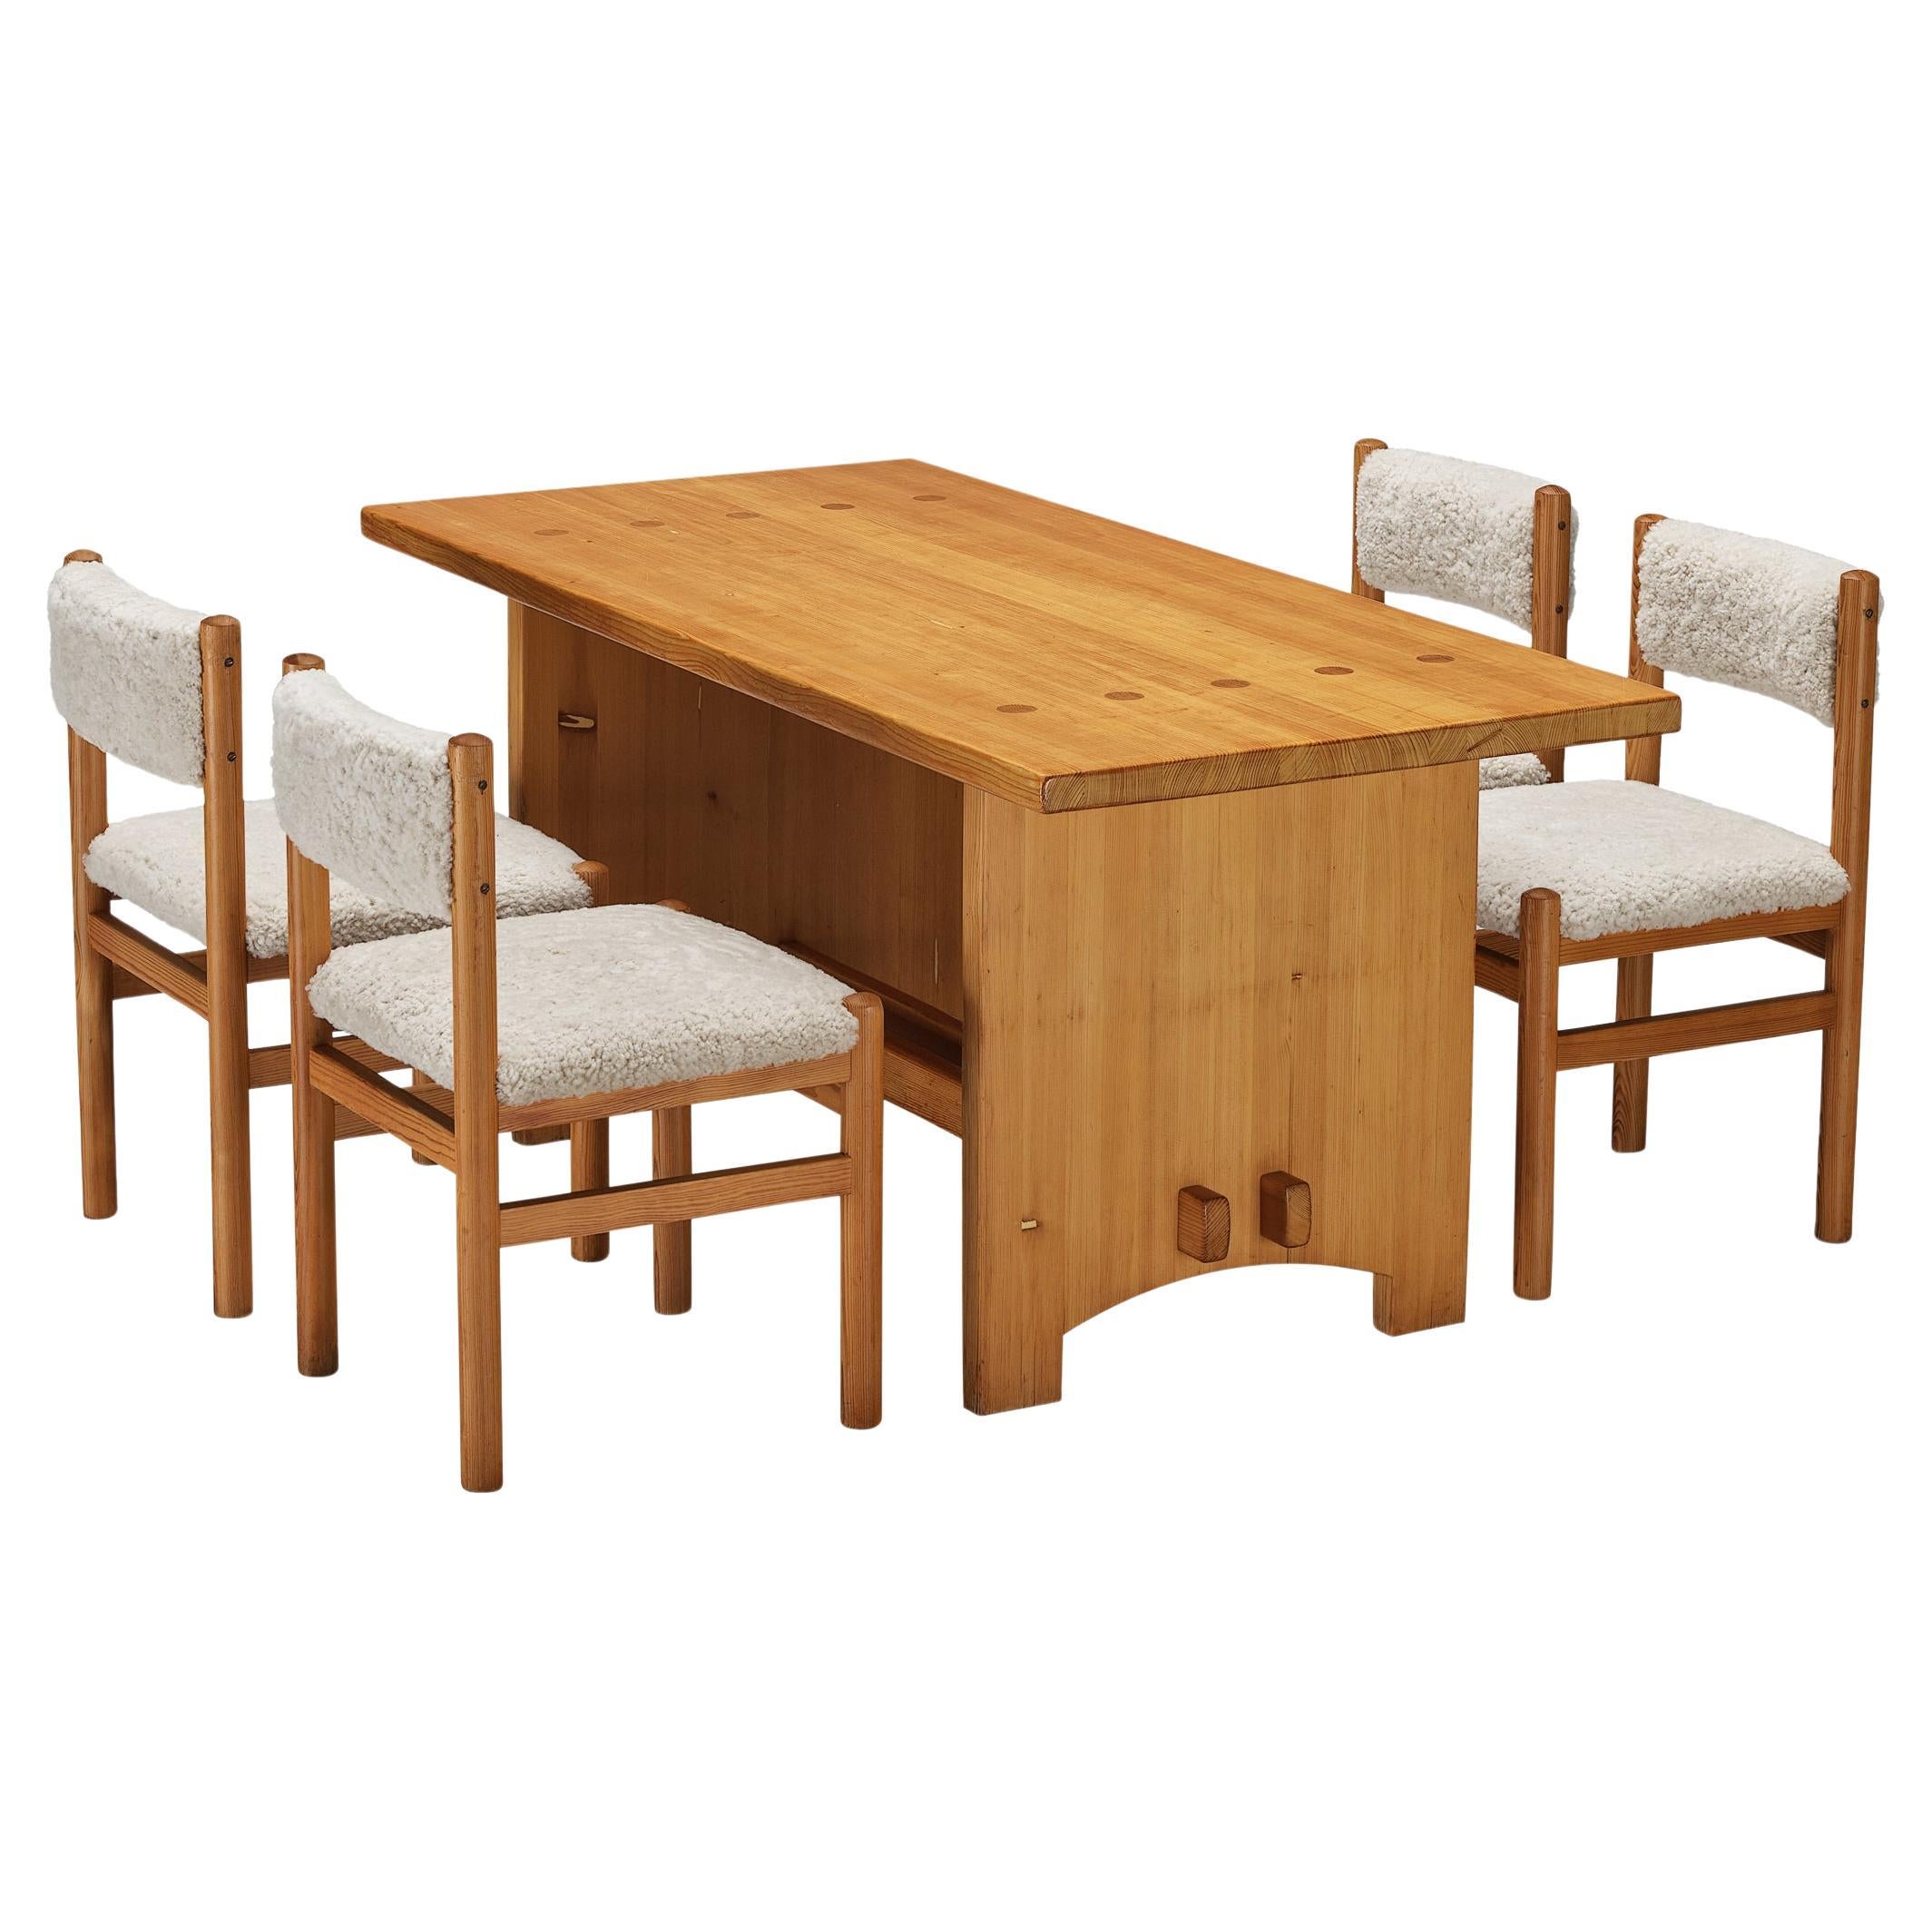 How much space do I need for my dining table?